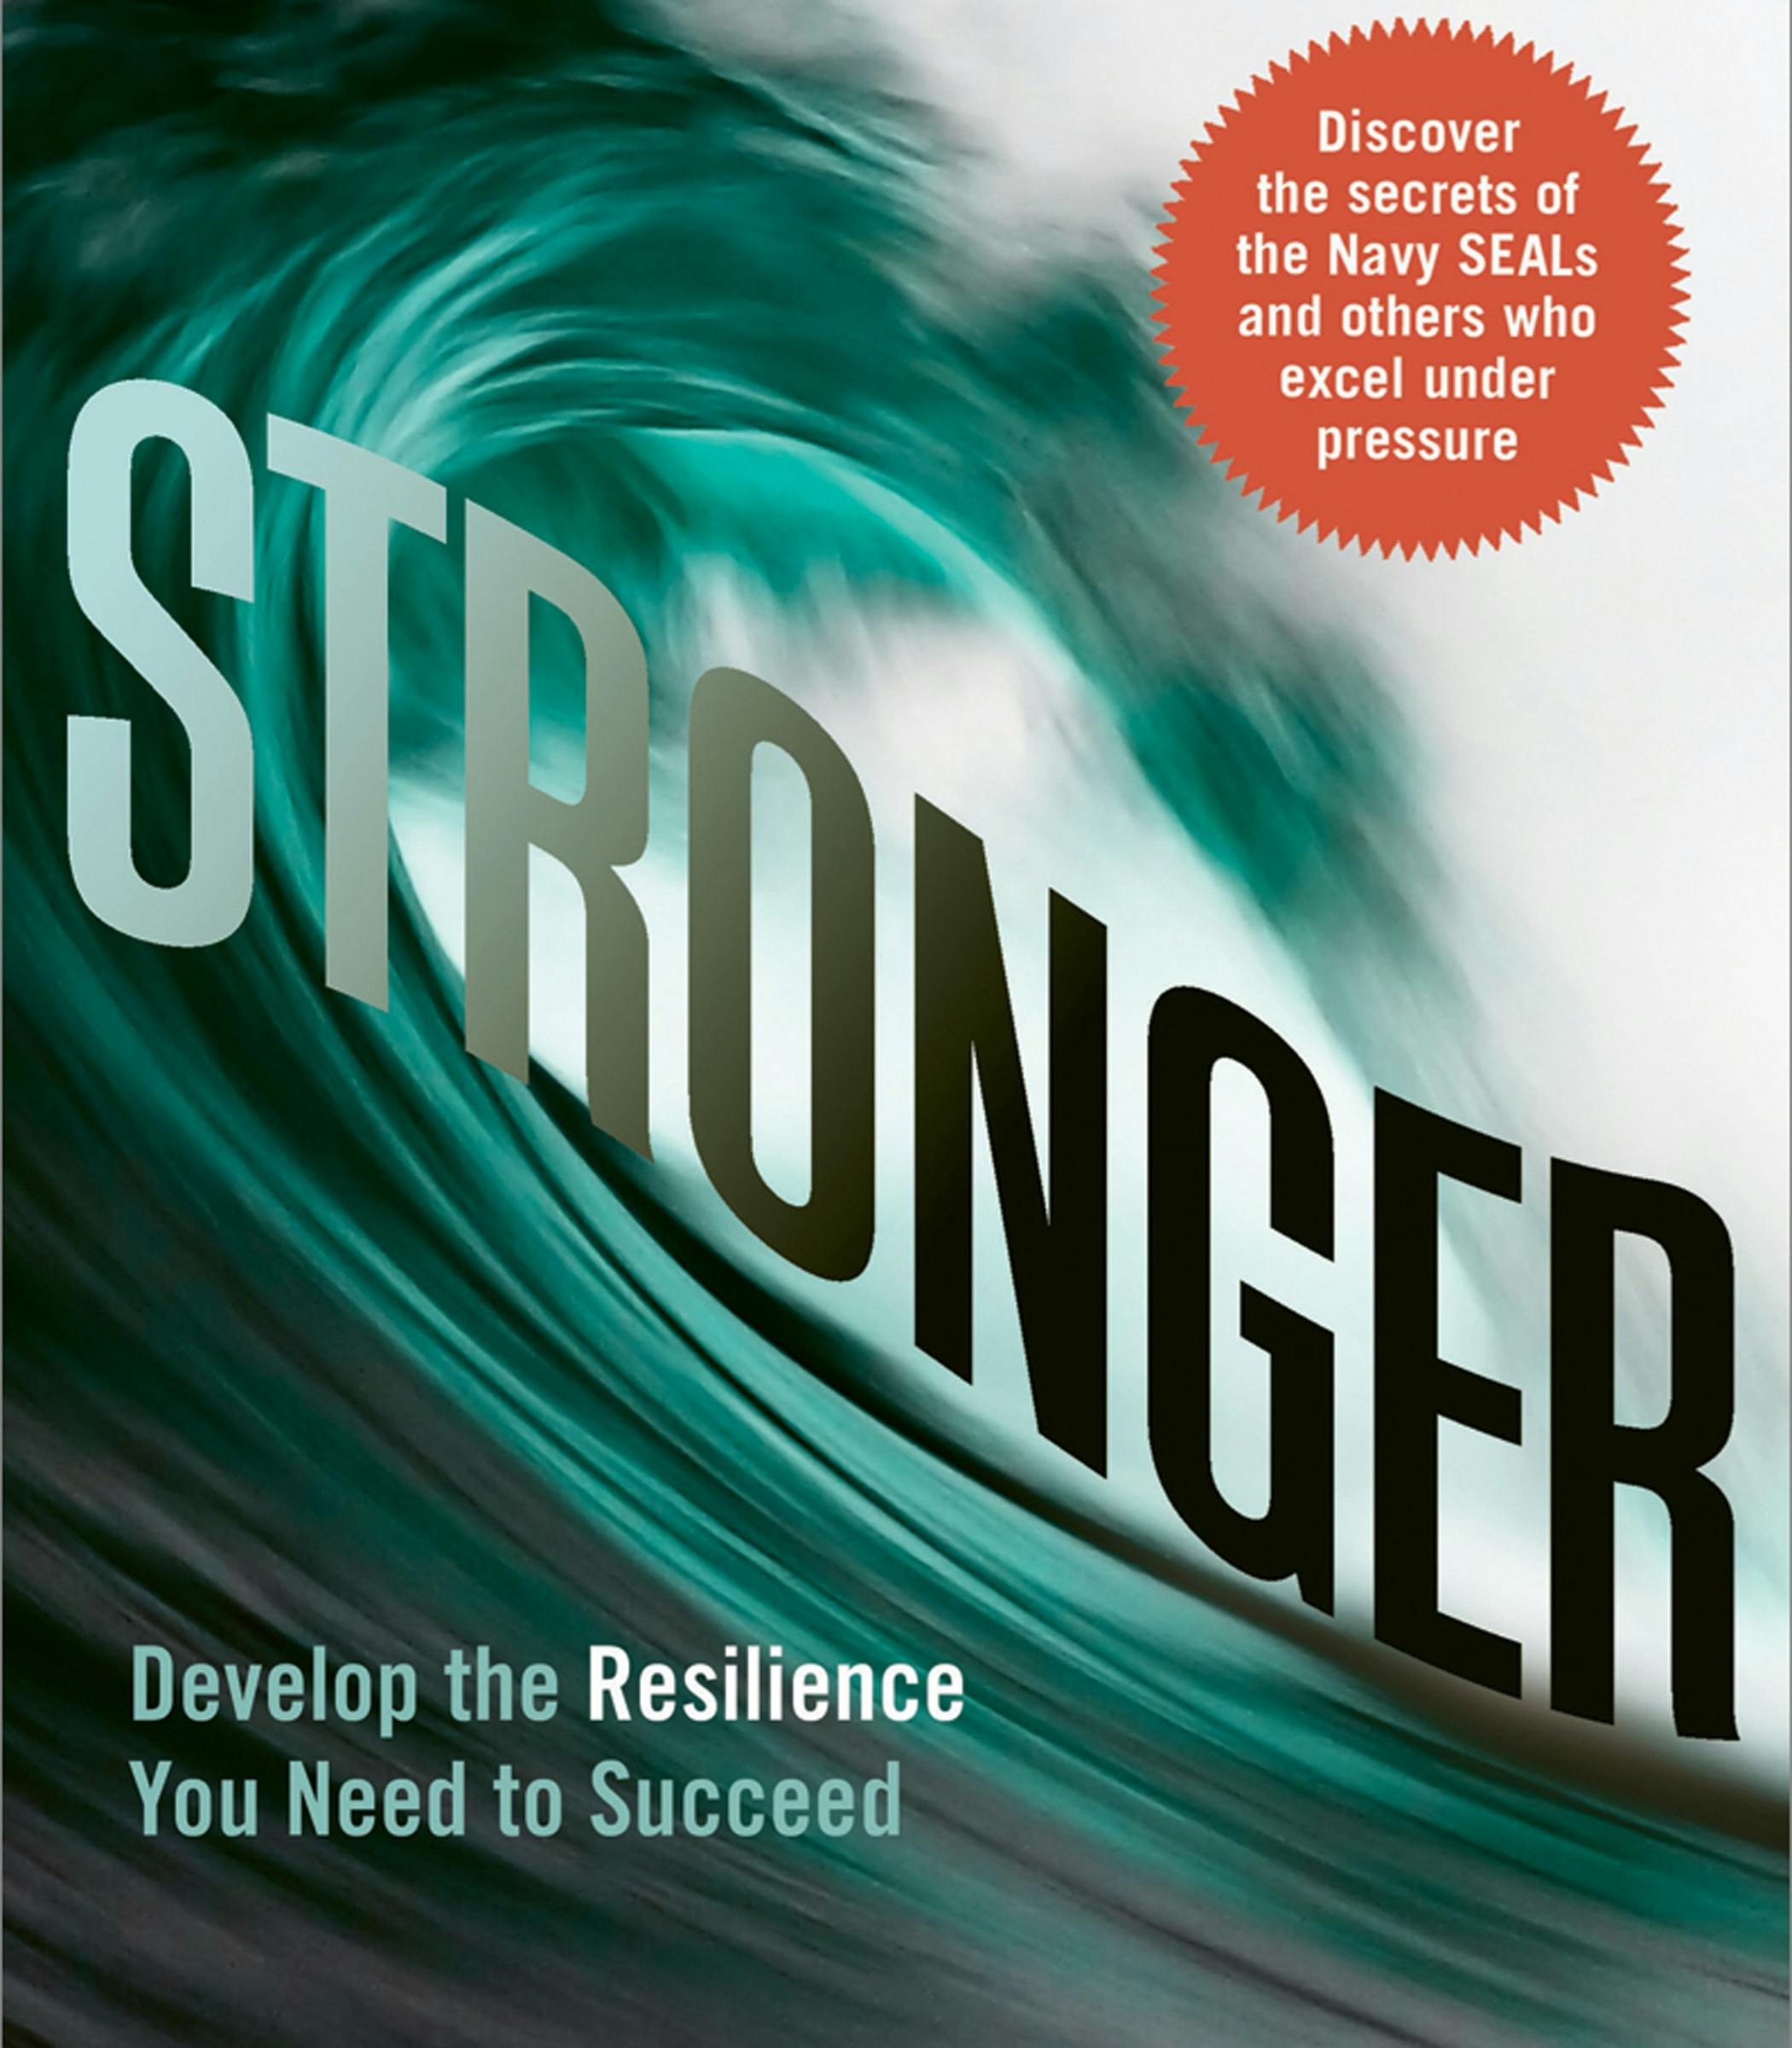 Stronger: Develop the Resilience You Need to Succeed - Dennis K. McCormack, Douglas A. Strouse, George S. Everly